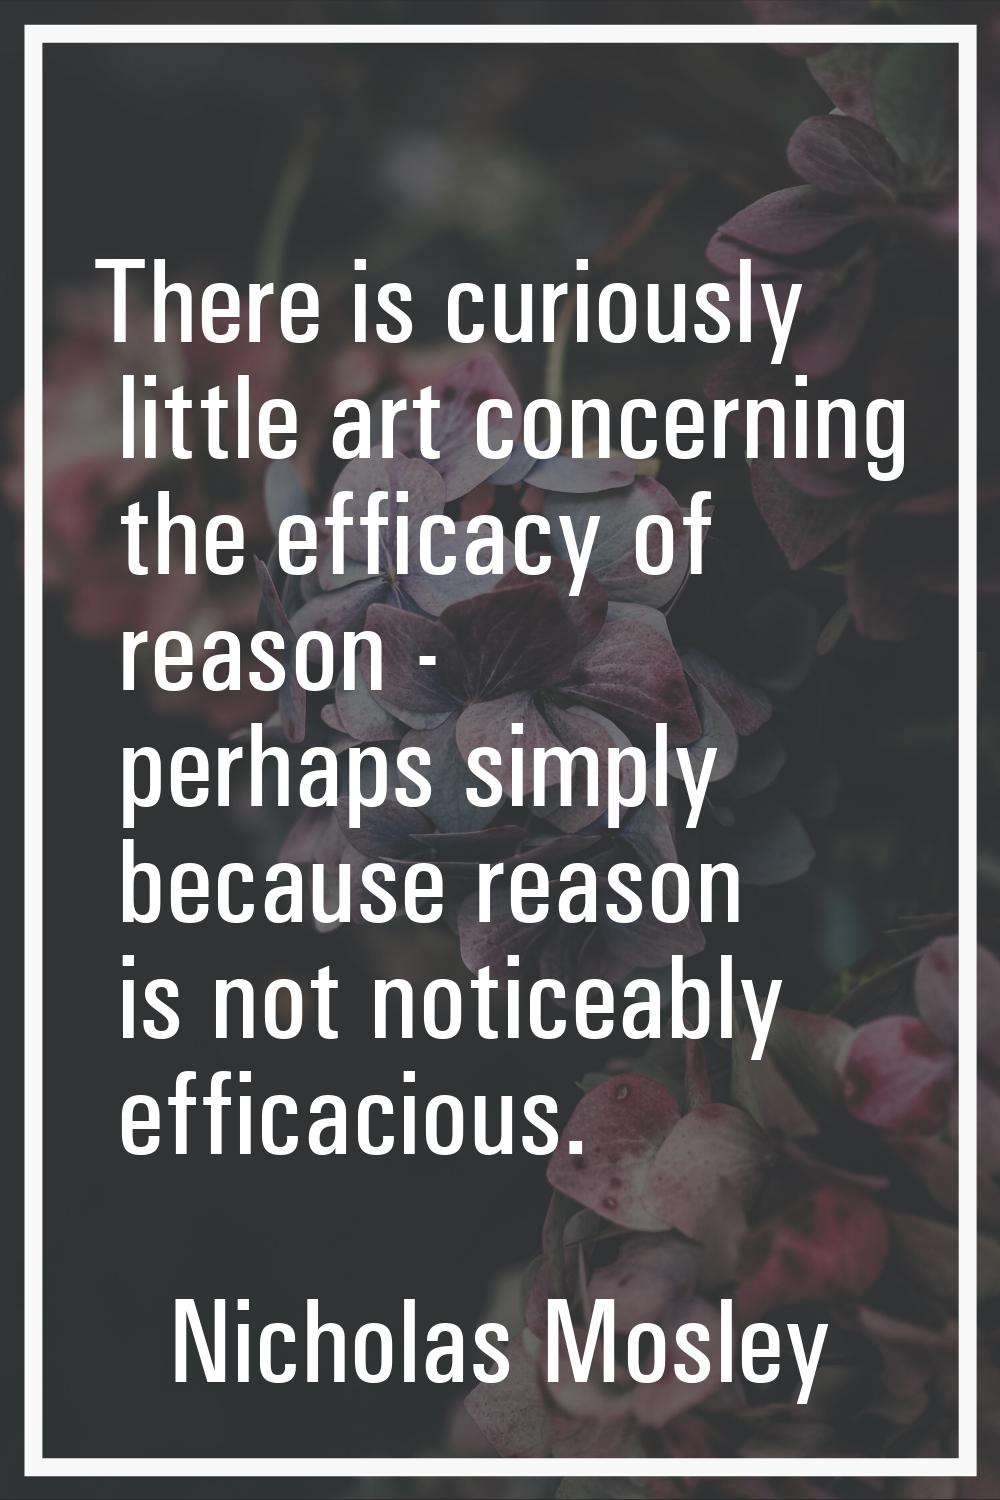 There is curiously little art concerning the efficacy of reason - perhaps simply because reason is 